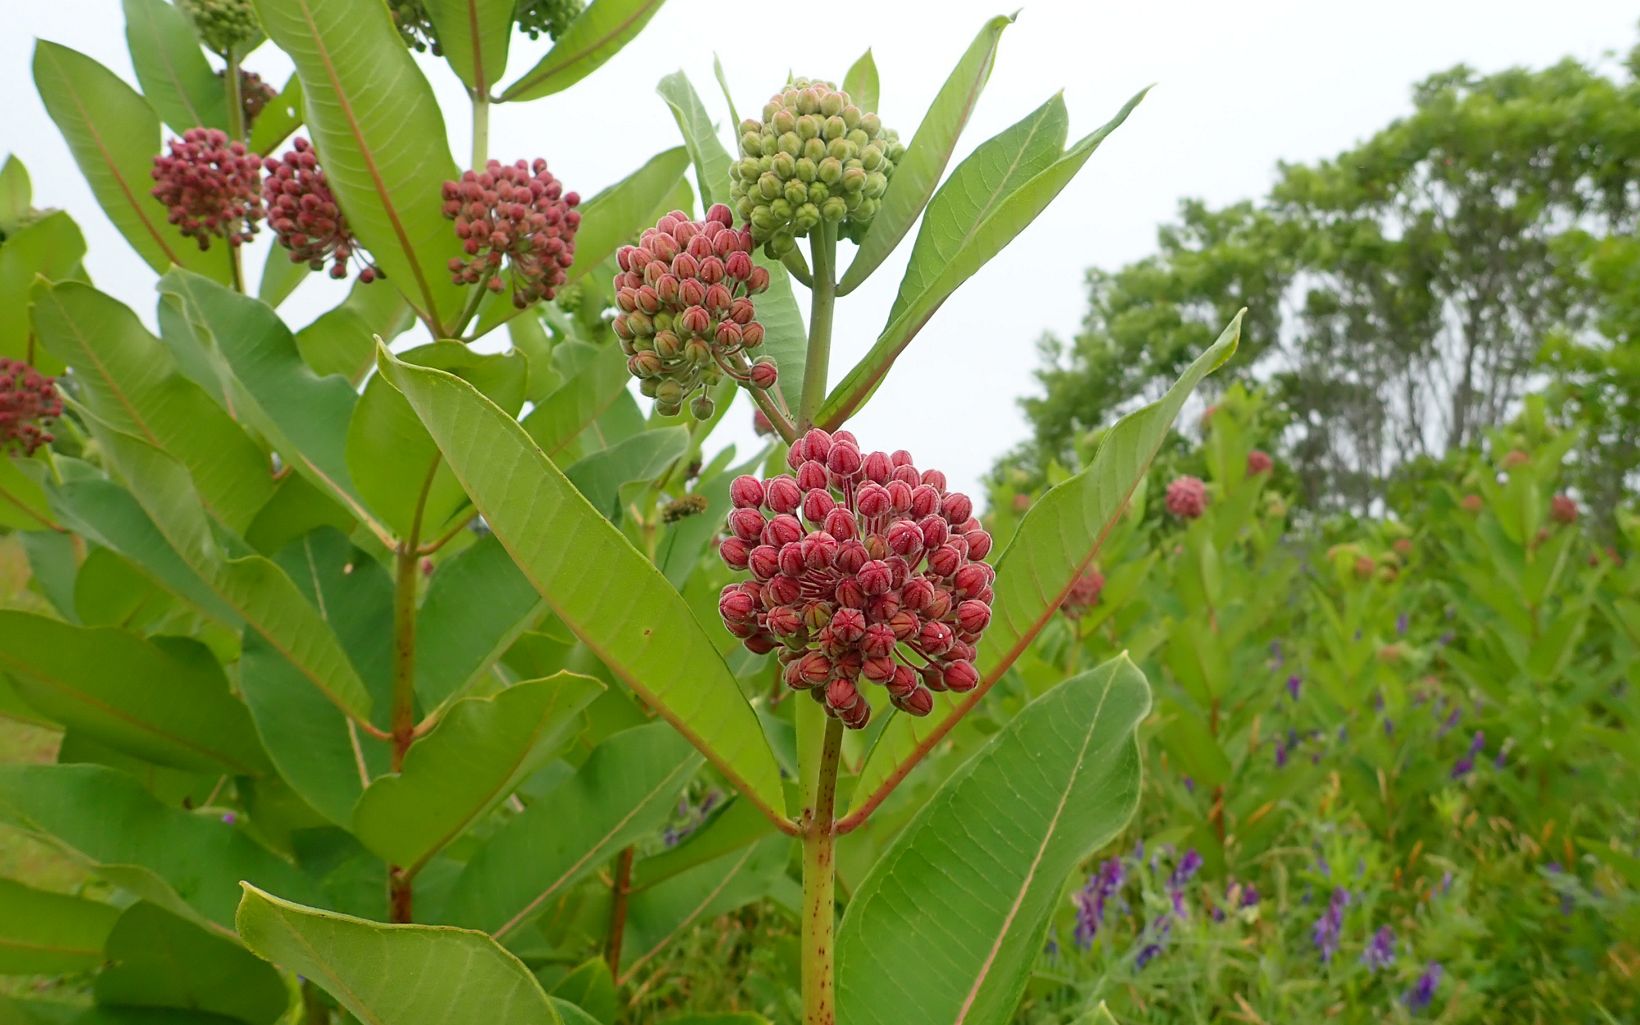 Milkweed with clumps of red flower buds that are almost ready to open.